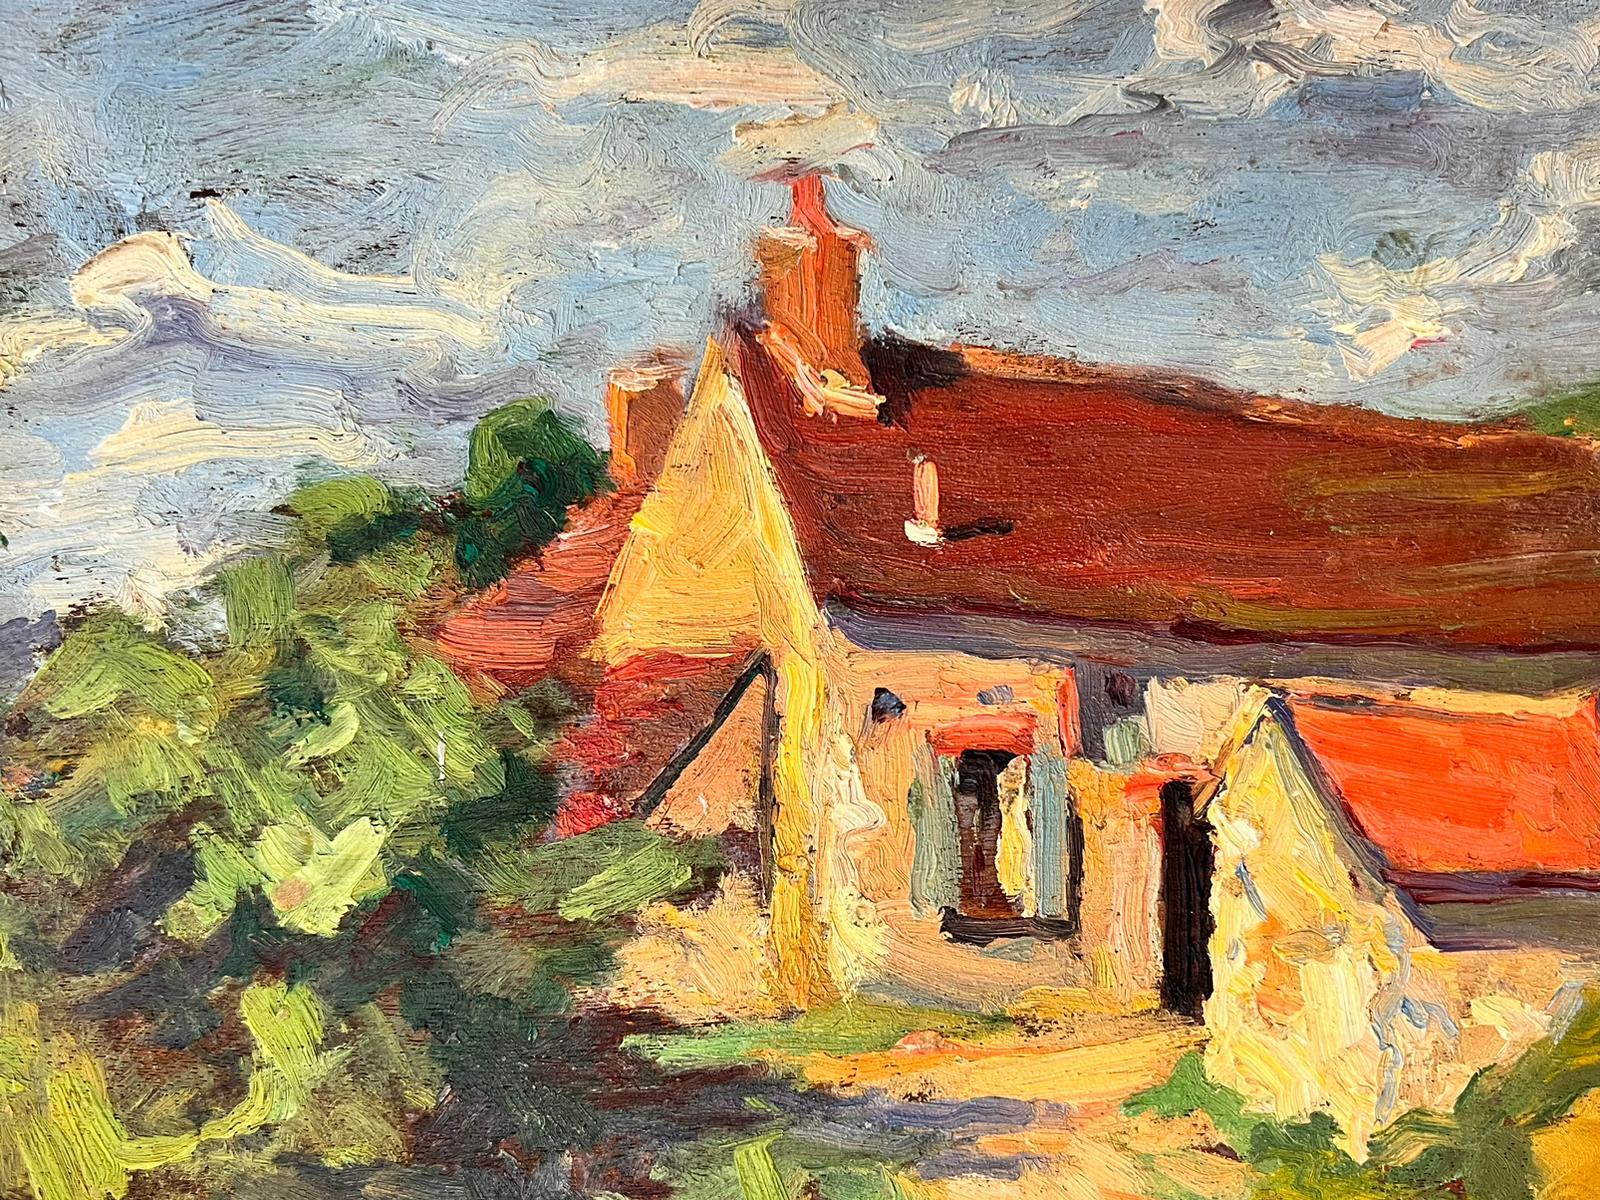 Artist/ School: Suzanne Crochet (French c. 1930), female French Impressionist artist

Title: The Country Cottage

Medium: oil on board, unframed and double sided image

Size:

board: 8.5 x 13 inches

Provenance: private collection,